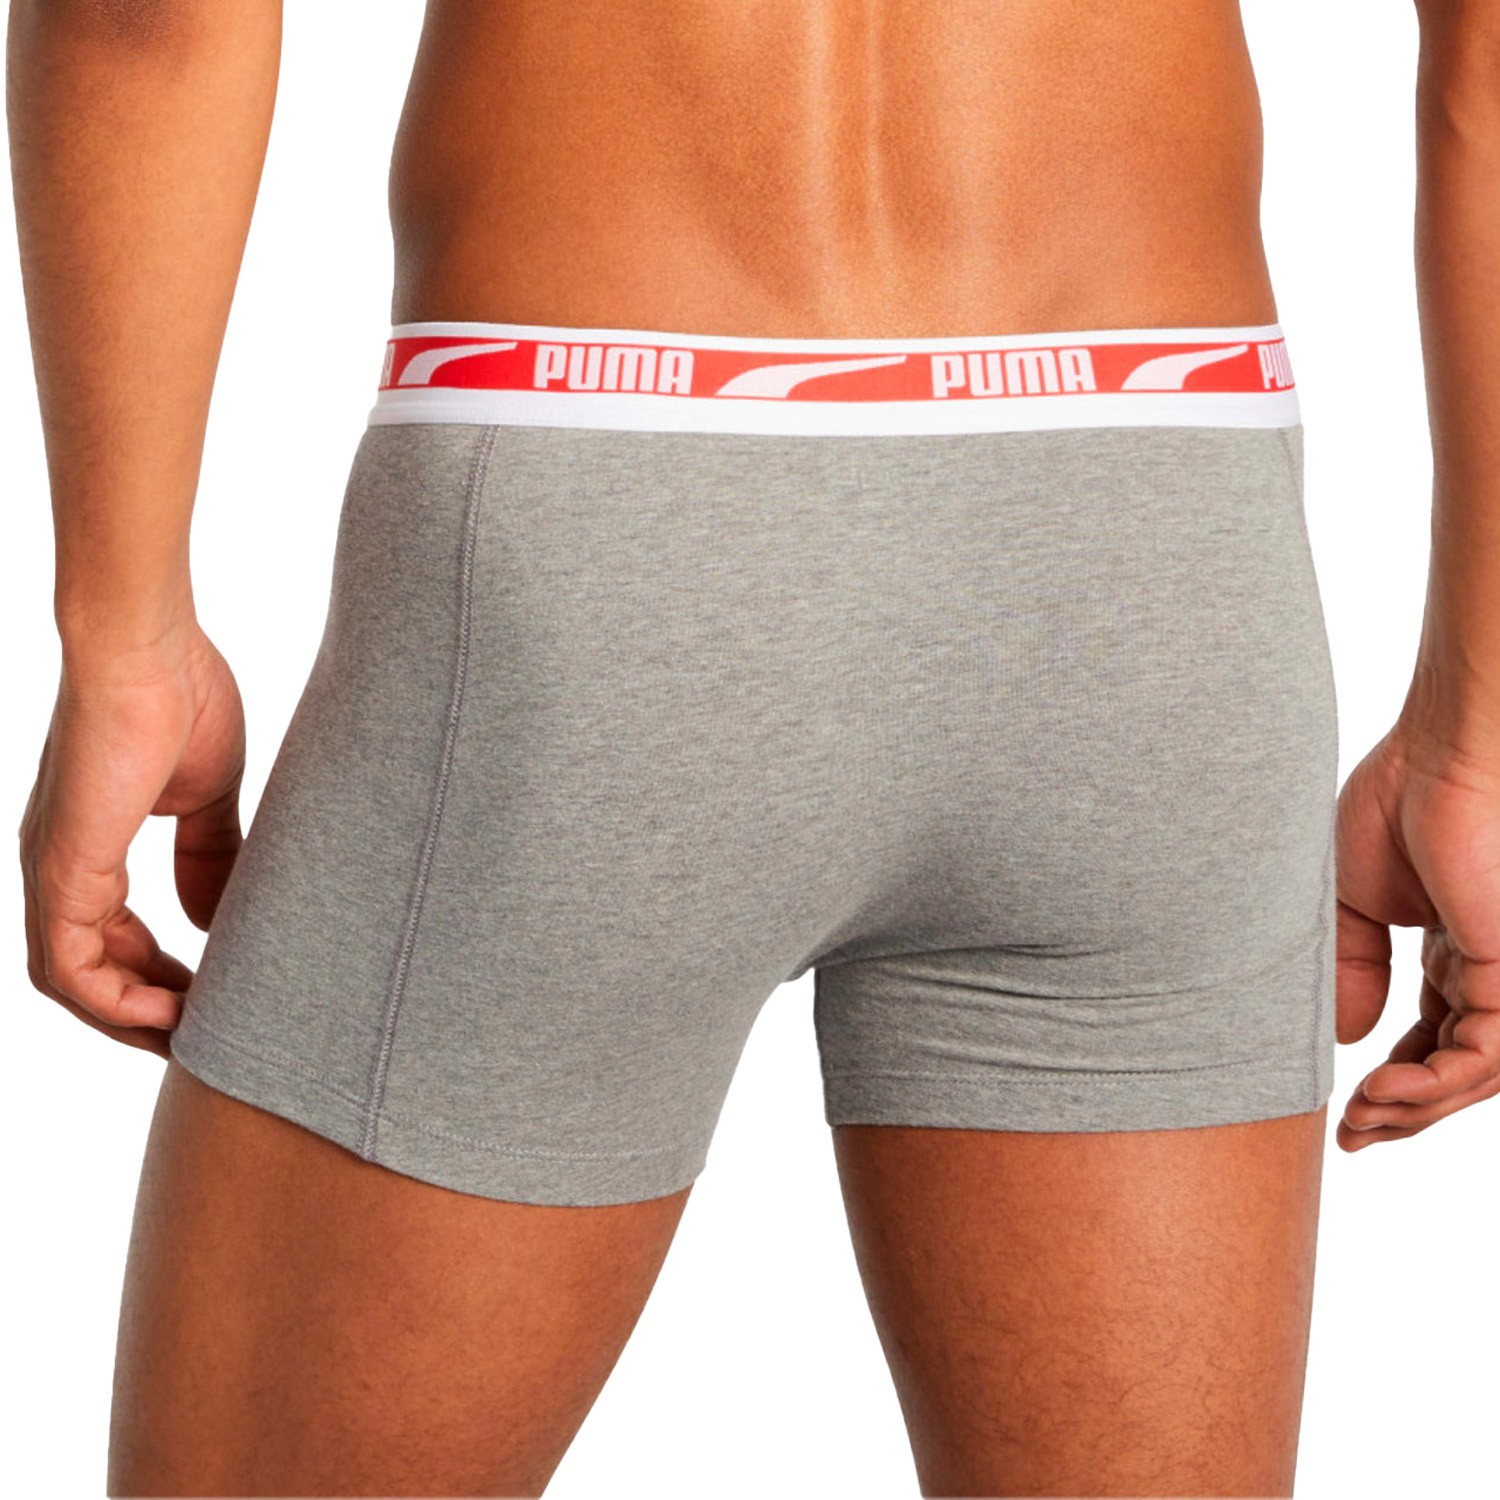 Set of 2 PUMA and - man red: grey logo for Multi Packs boxers